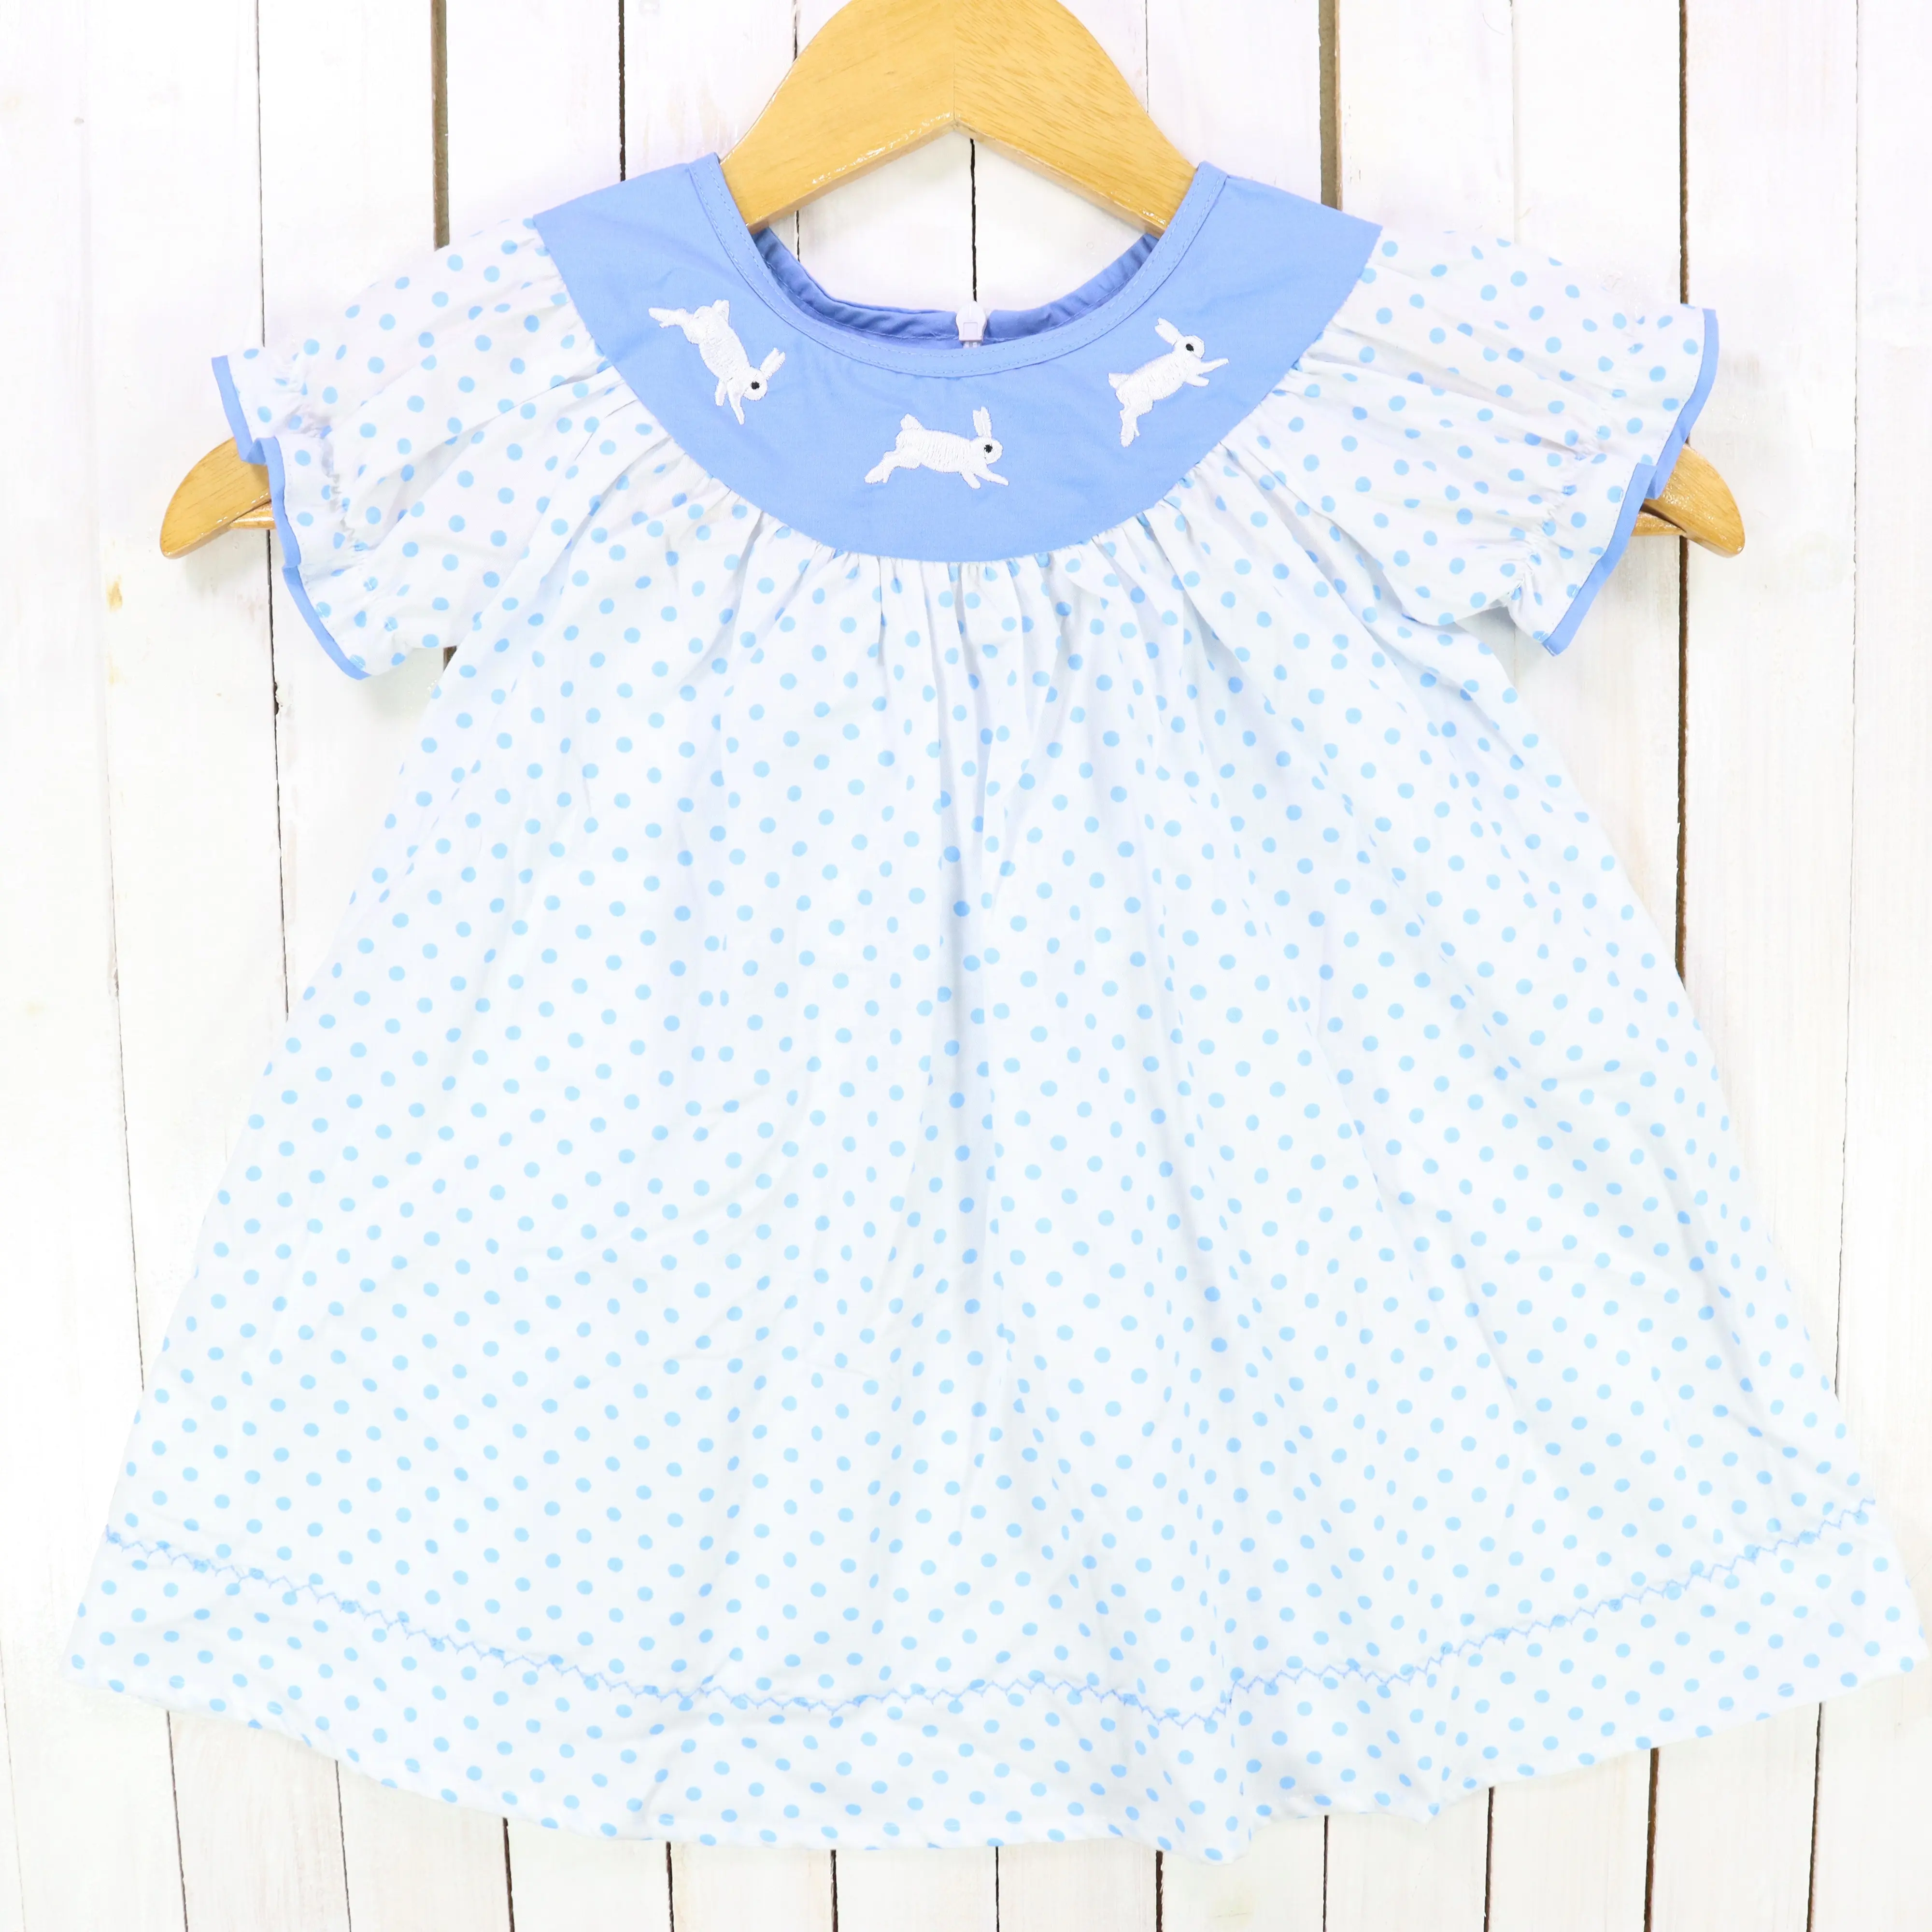 Toddler Girl Super Cotton Knitted Dress Professional Manufacturer Dots Printing Fancy Children Dresses Cute Girls Clothes